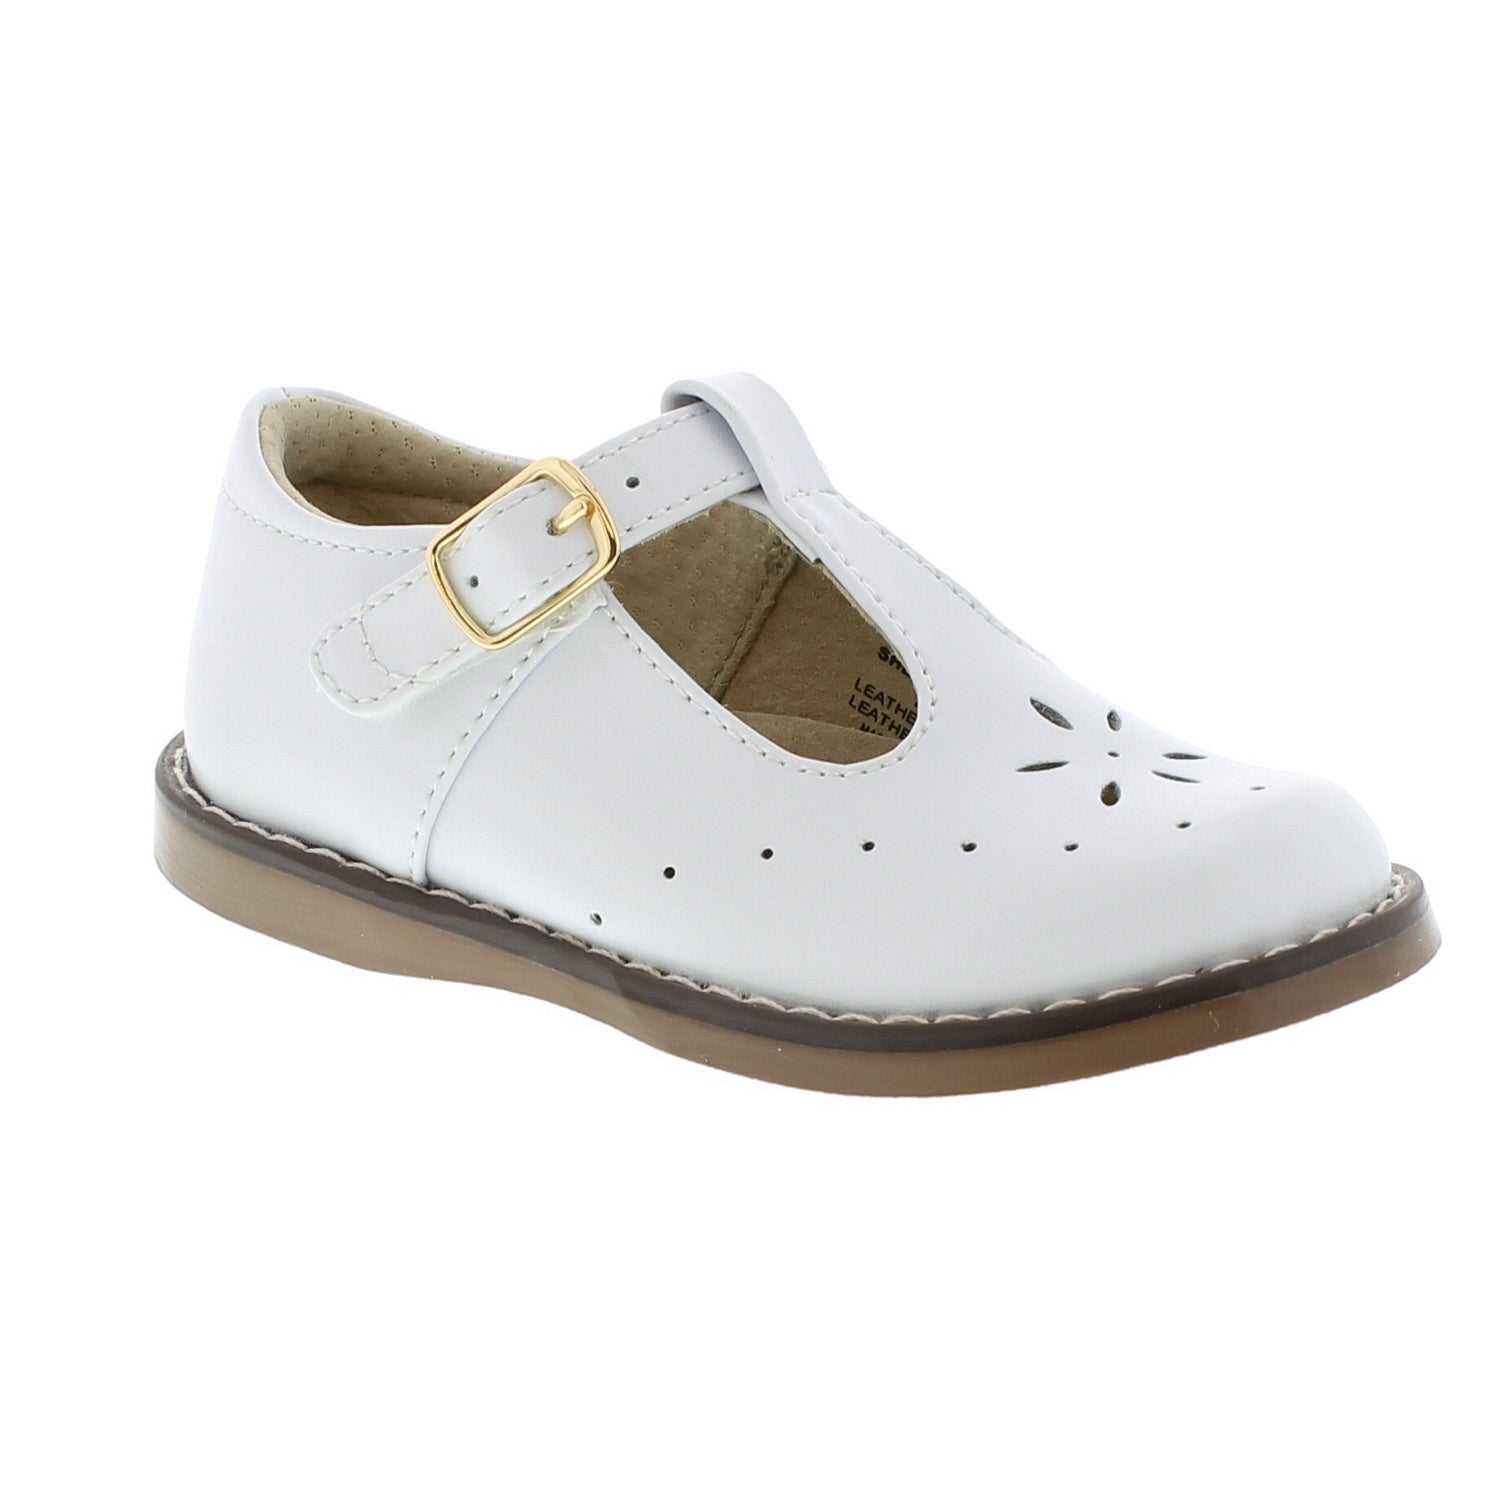 Girl's Leather Footmates Dress Shoes - Grace and James Kids